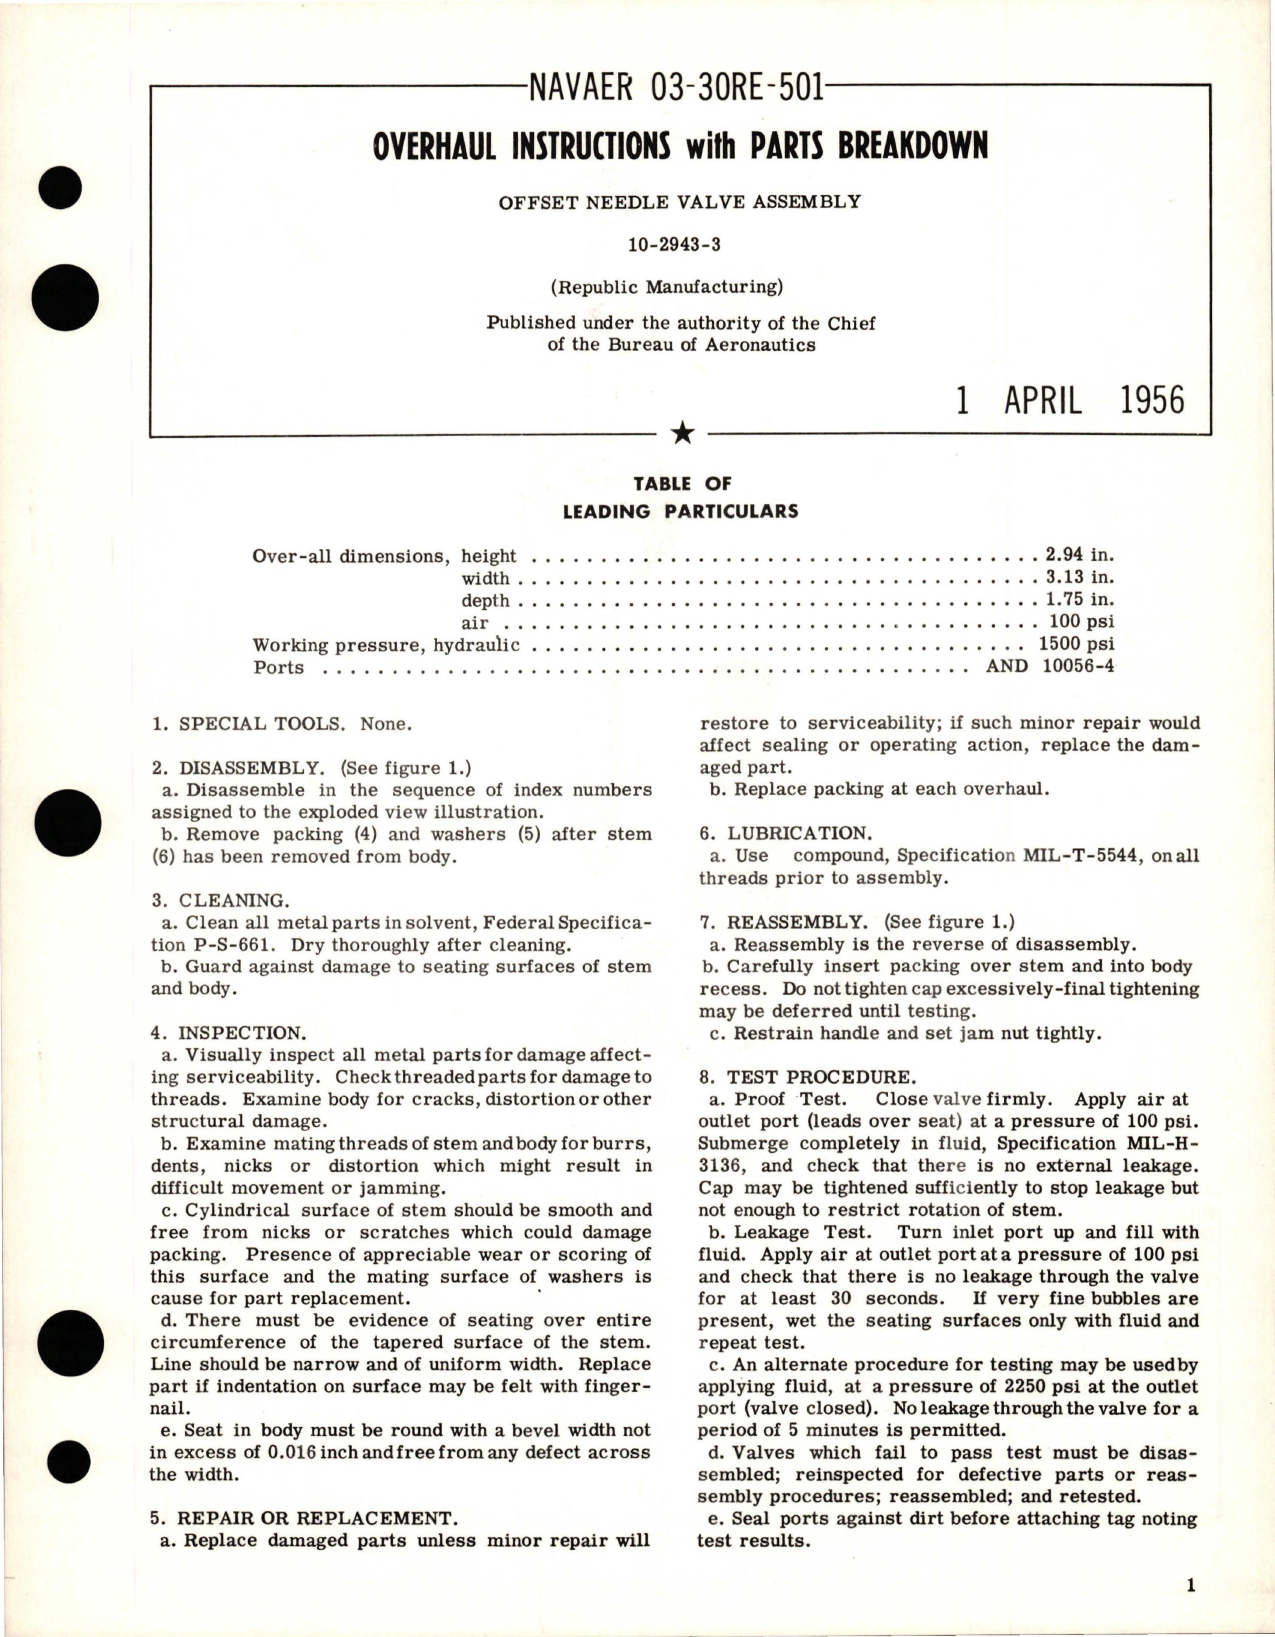 Sample page 1 from AirCorps Library document: Overhaul Instructions with Parts Breakdown for Offset Needle Valve Assembly - 10-2943-3